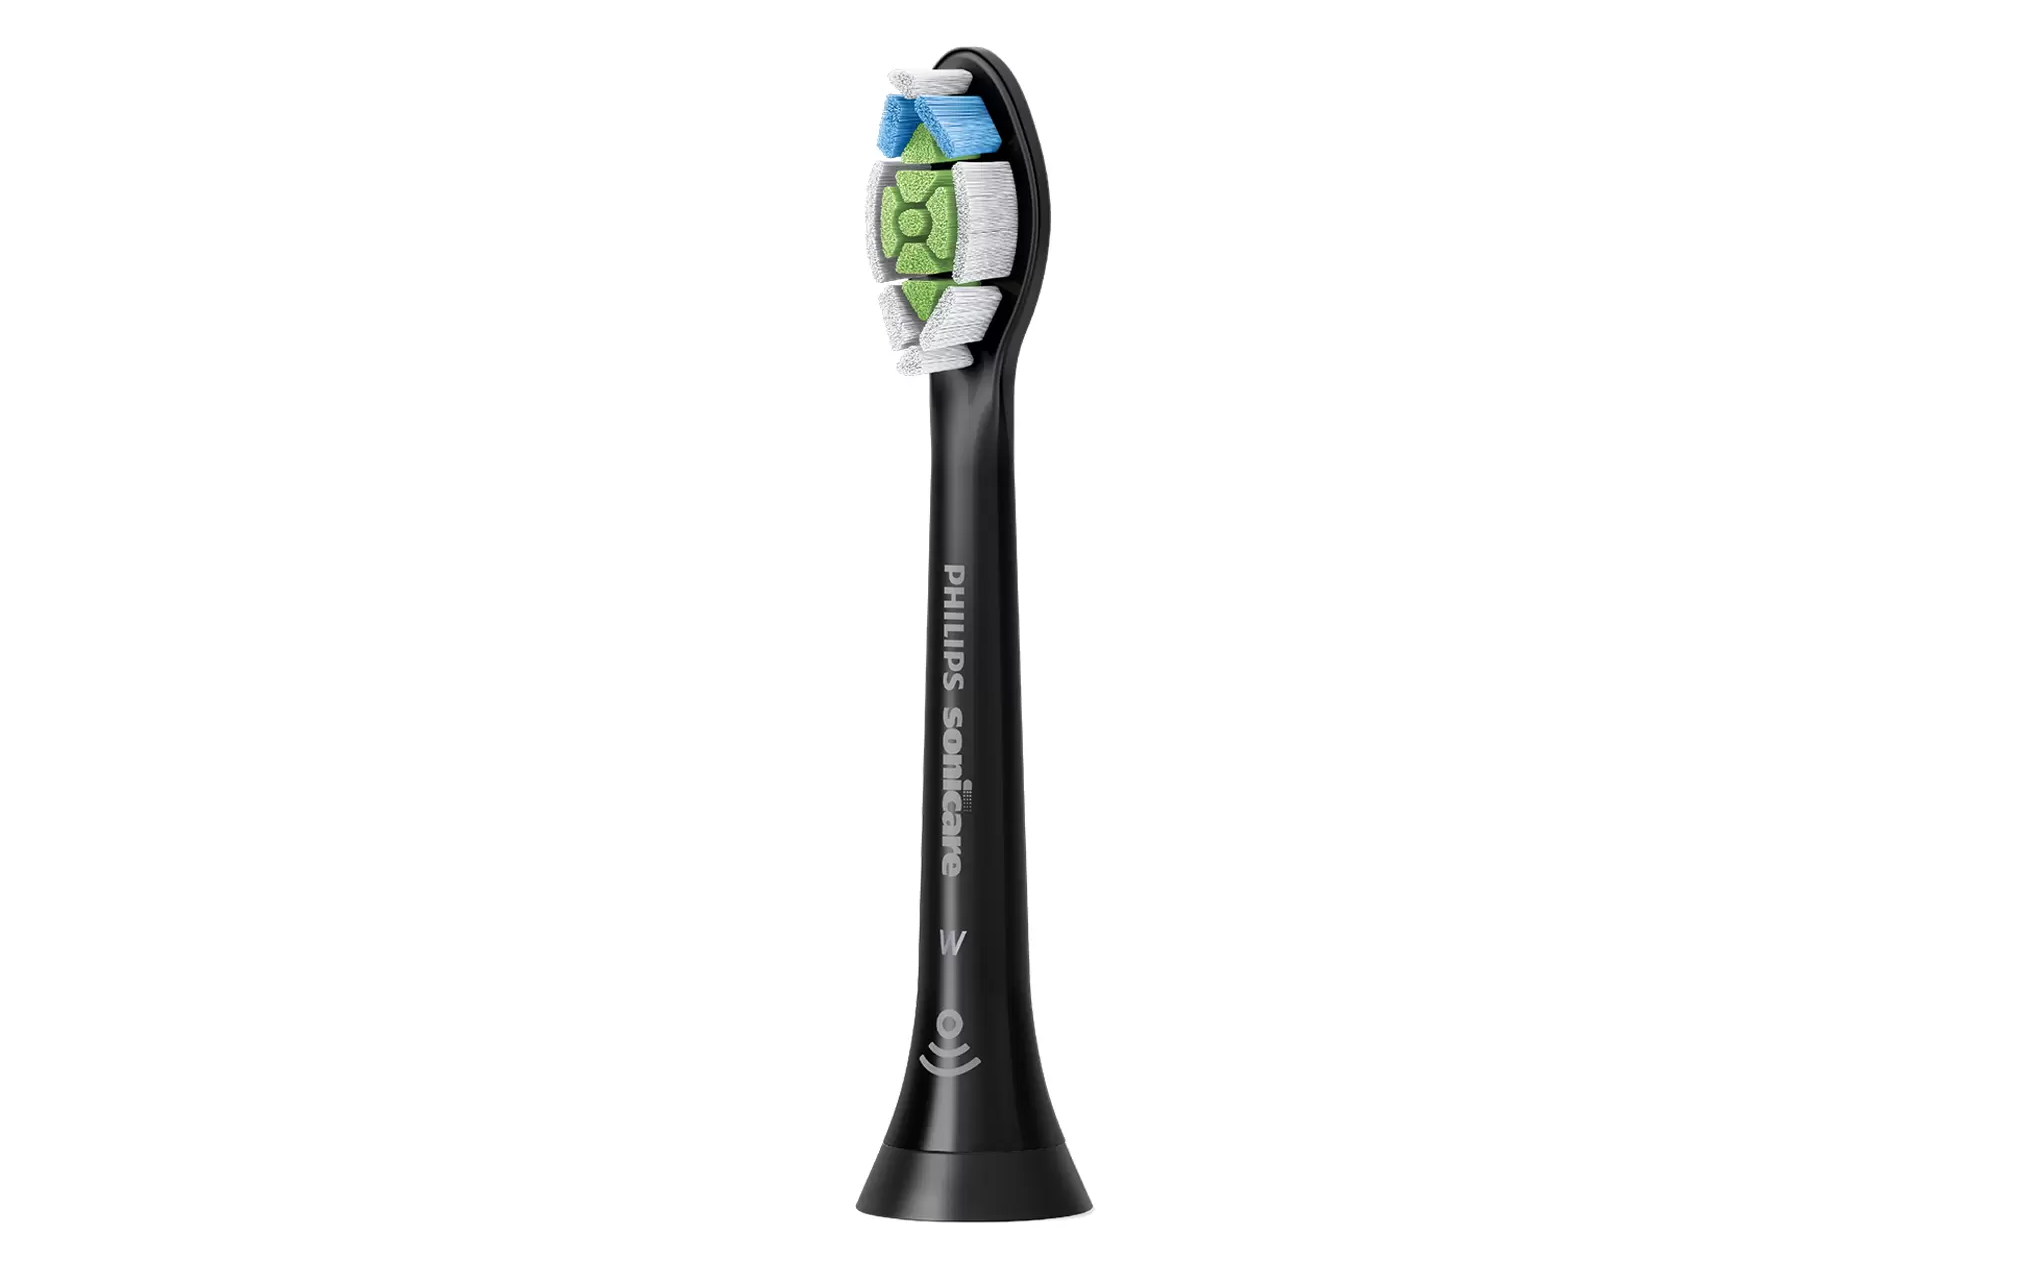 Philips Sonicare DiamondClean Electric Toothbrush Heads 6pk from $42.99 delivered for Costco members